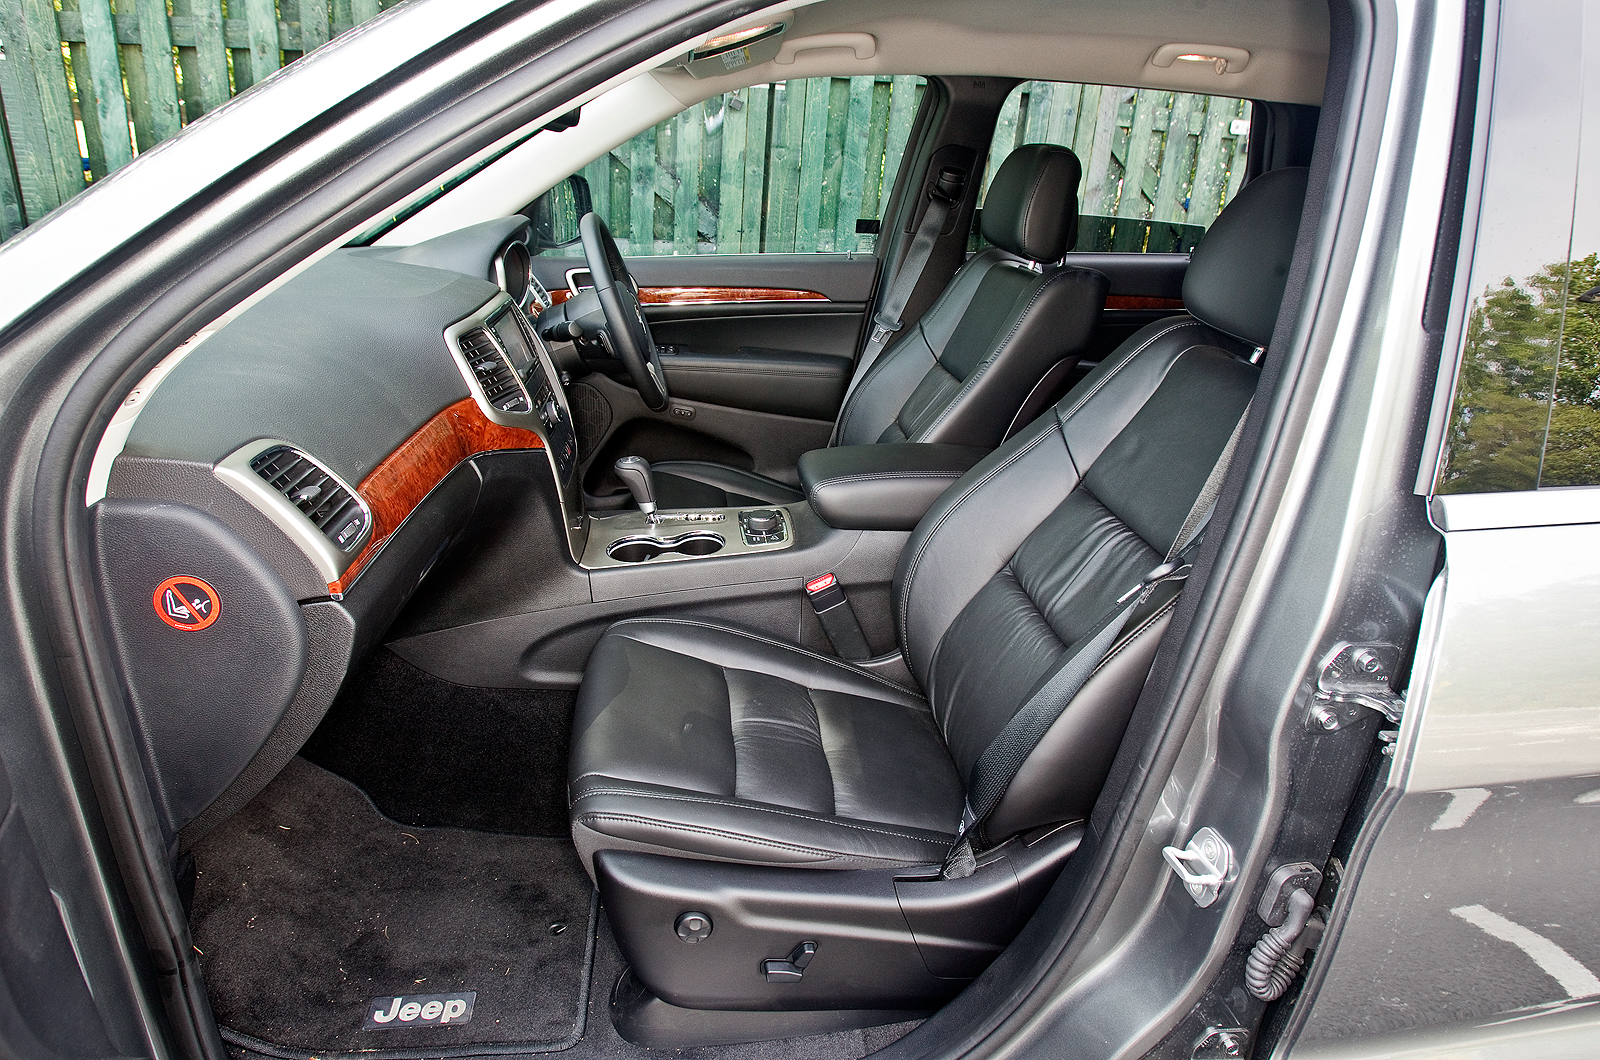 Jeep Grand Cherokee front seats